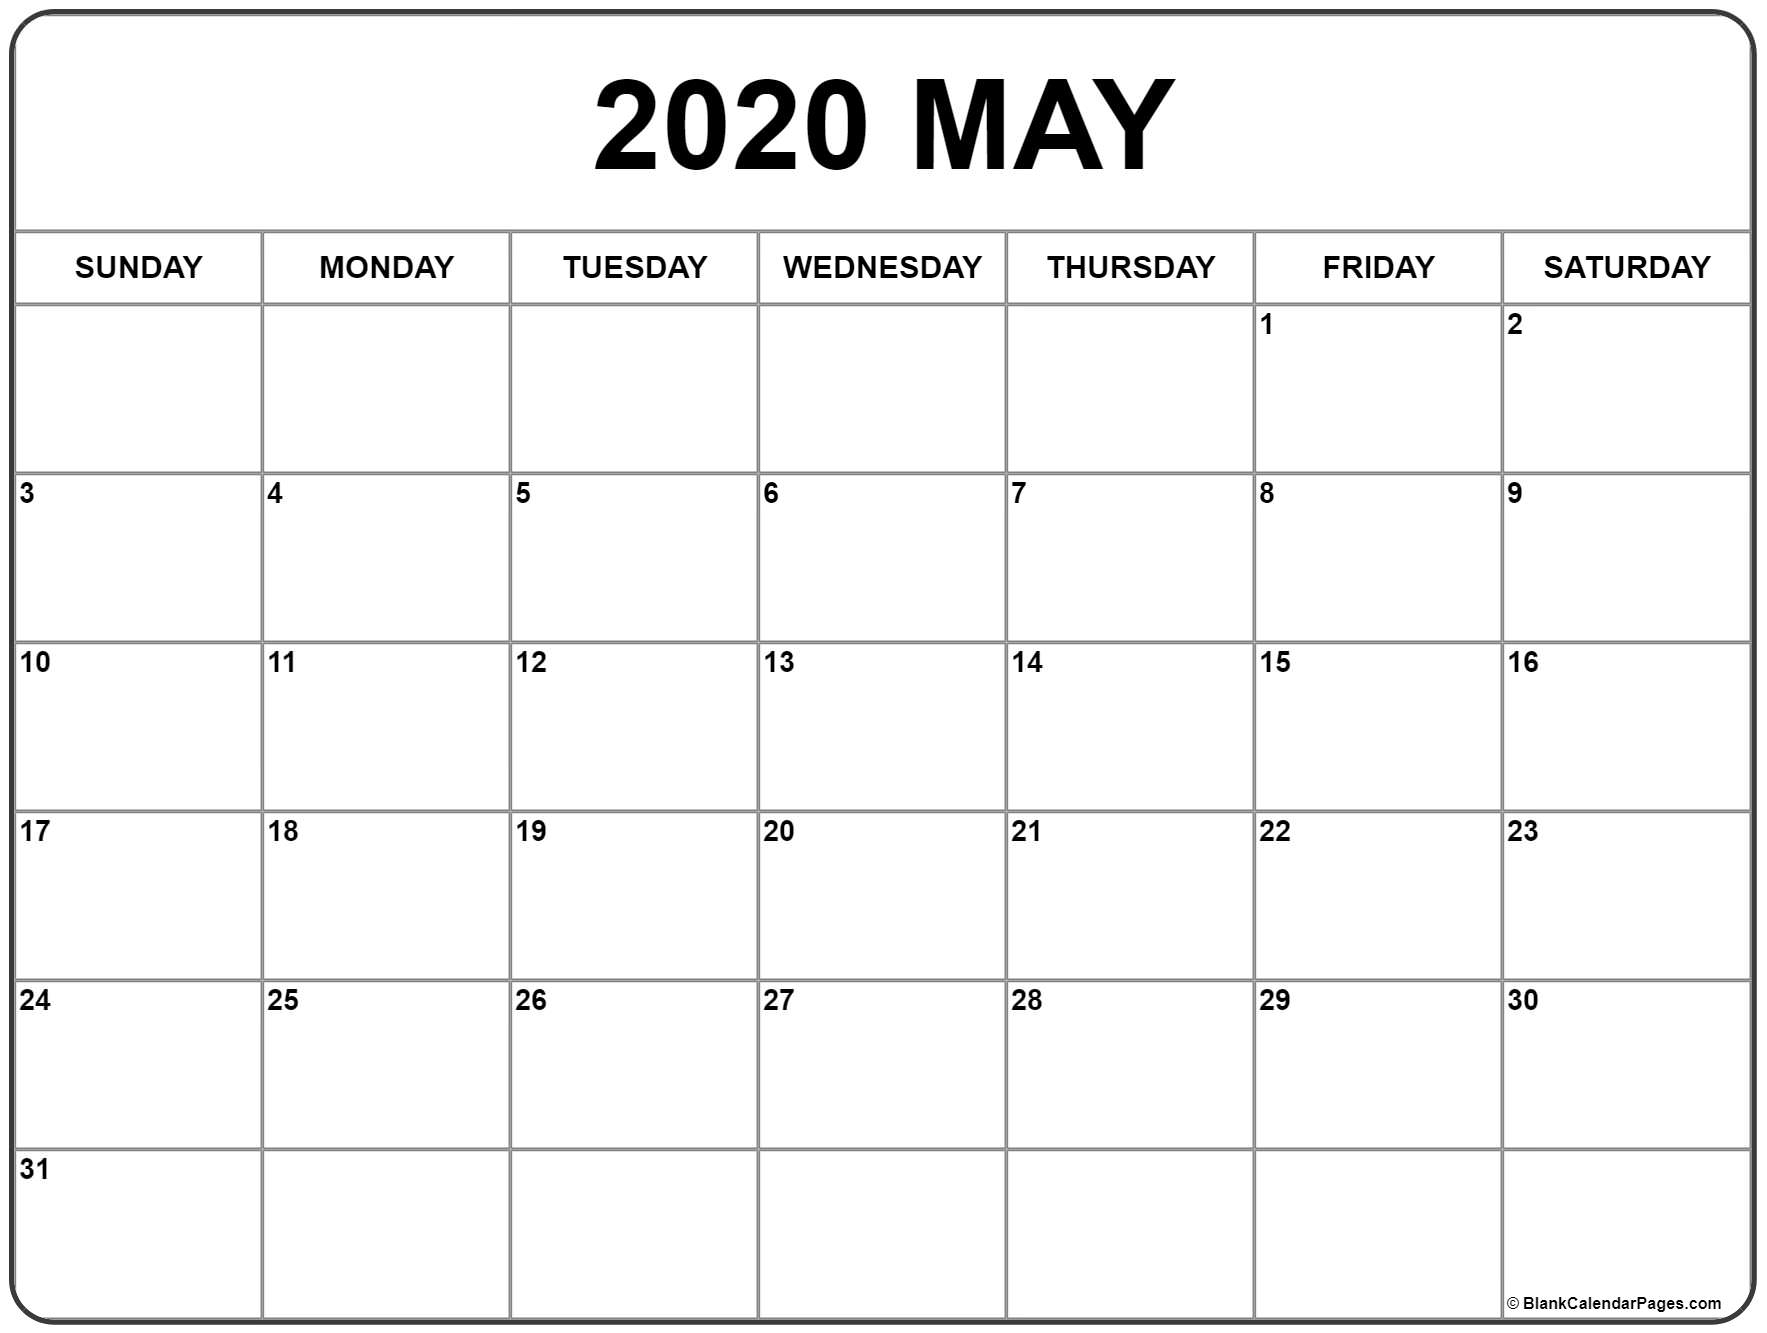 May 2020 Calendar | Free Printable Monthly Calendars for Print Free Calendars Without Downloading 2020